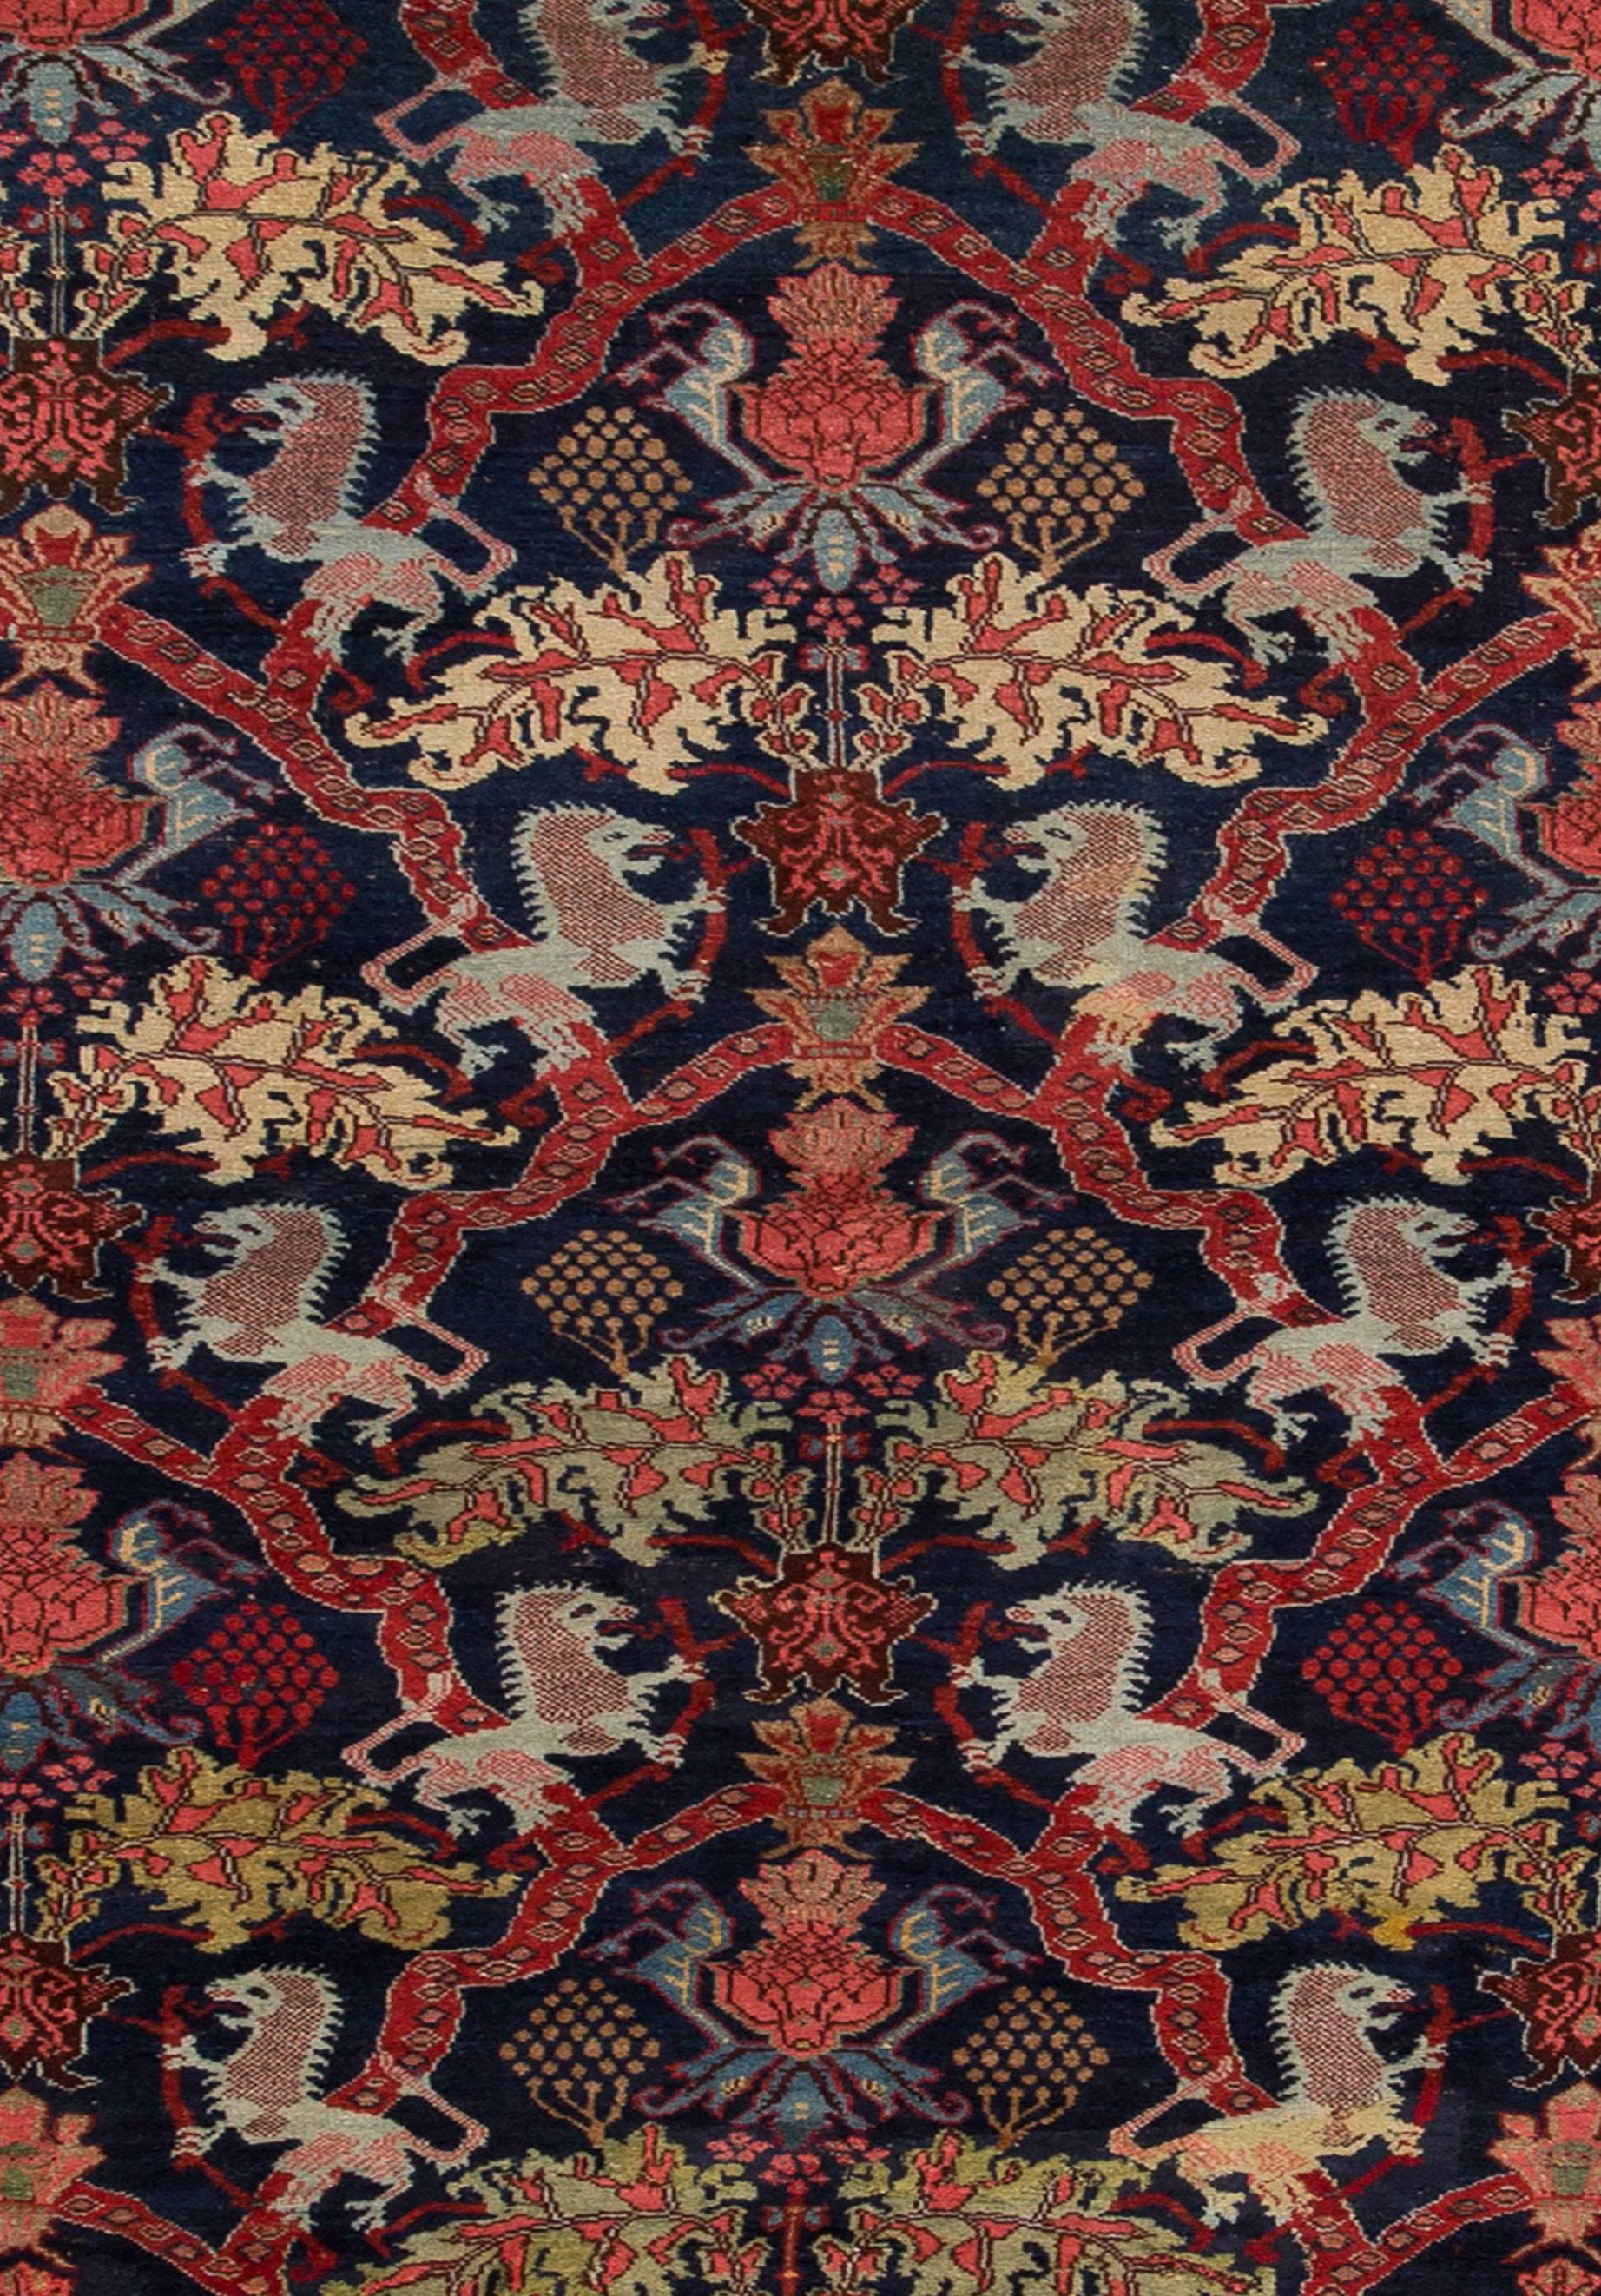 Hand-Knotted Antique Red and Blue All-Over Persian Bidjar Carpet, 4.05x6.10 For Sale